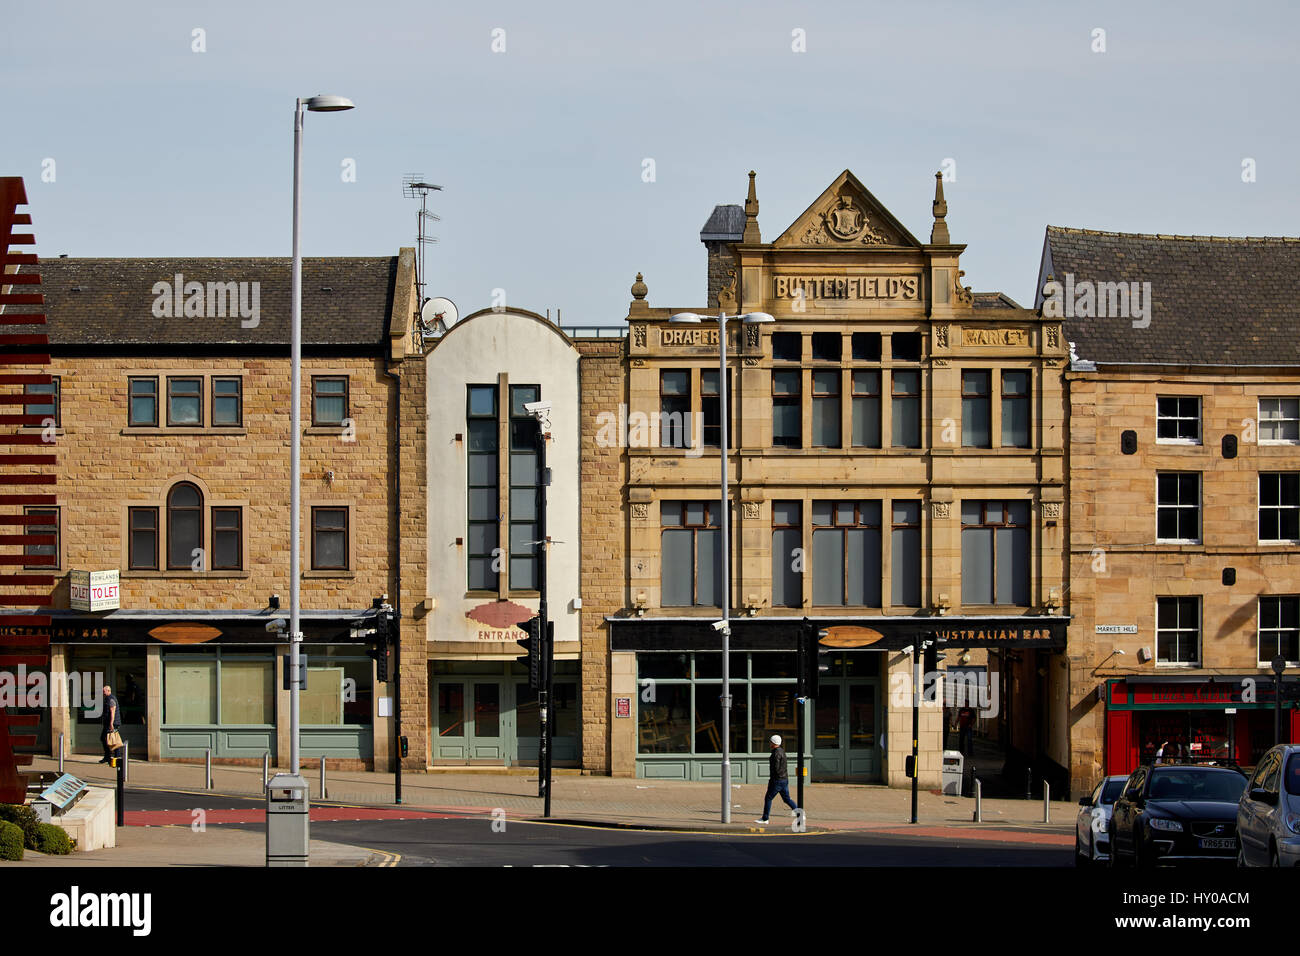 Butterfield's Barnsley town centre, South Yorkshire, England. UK. Stock Photo